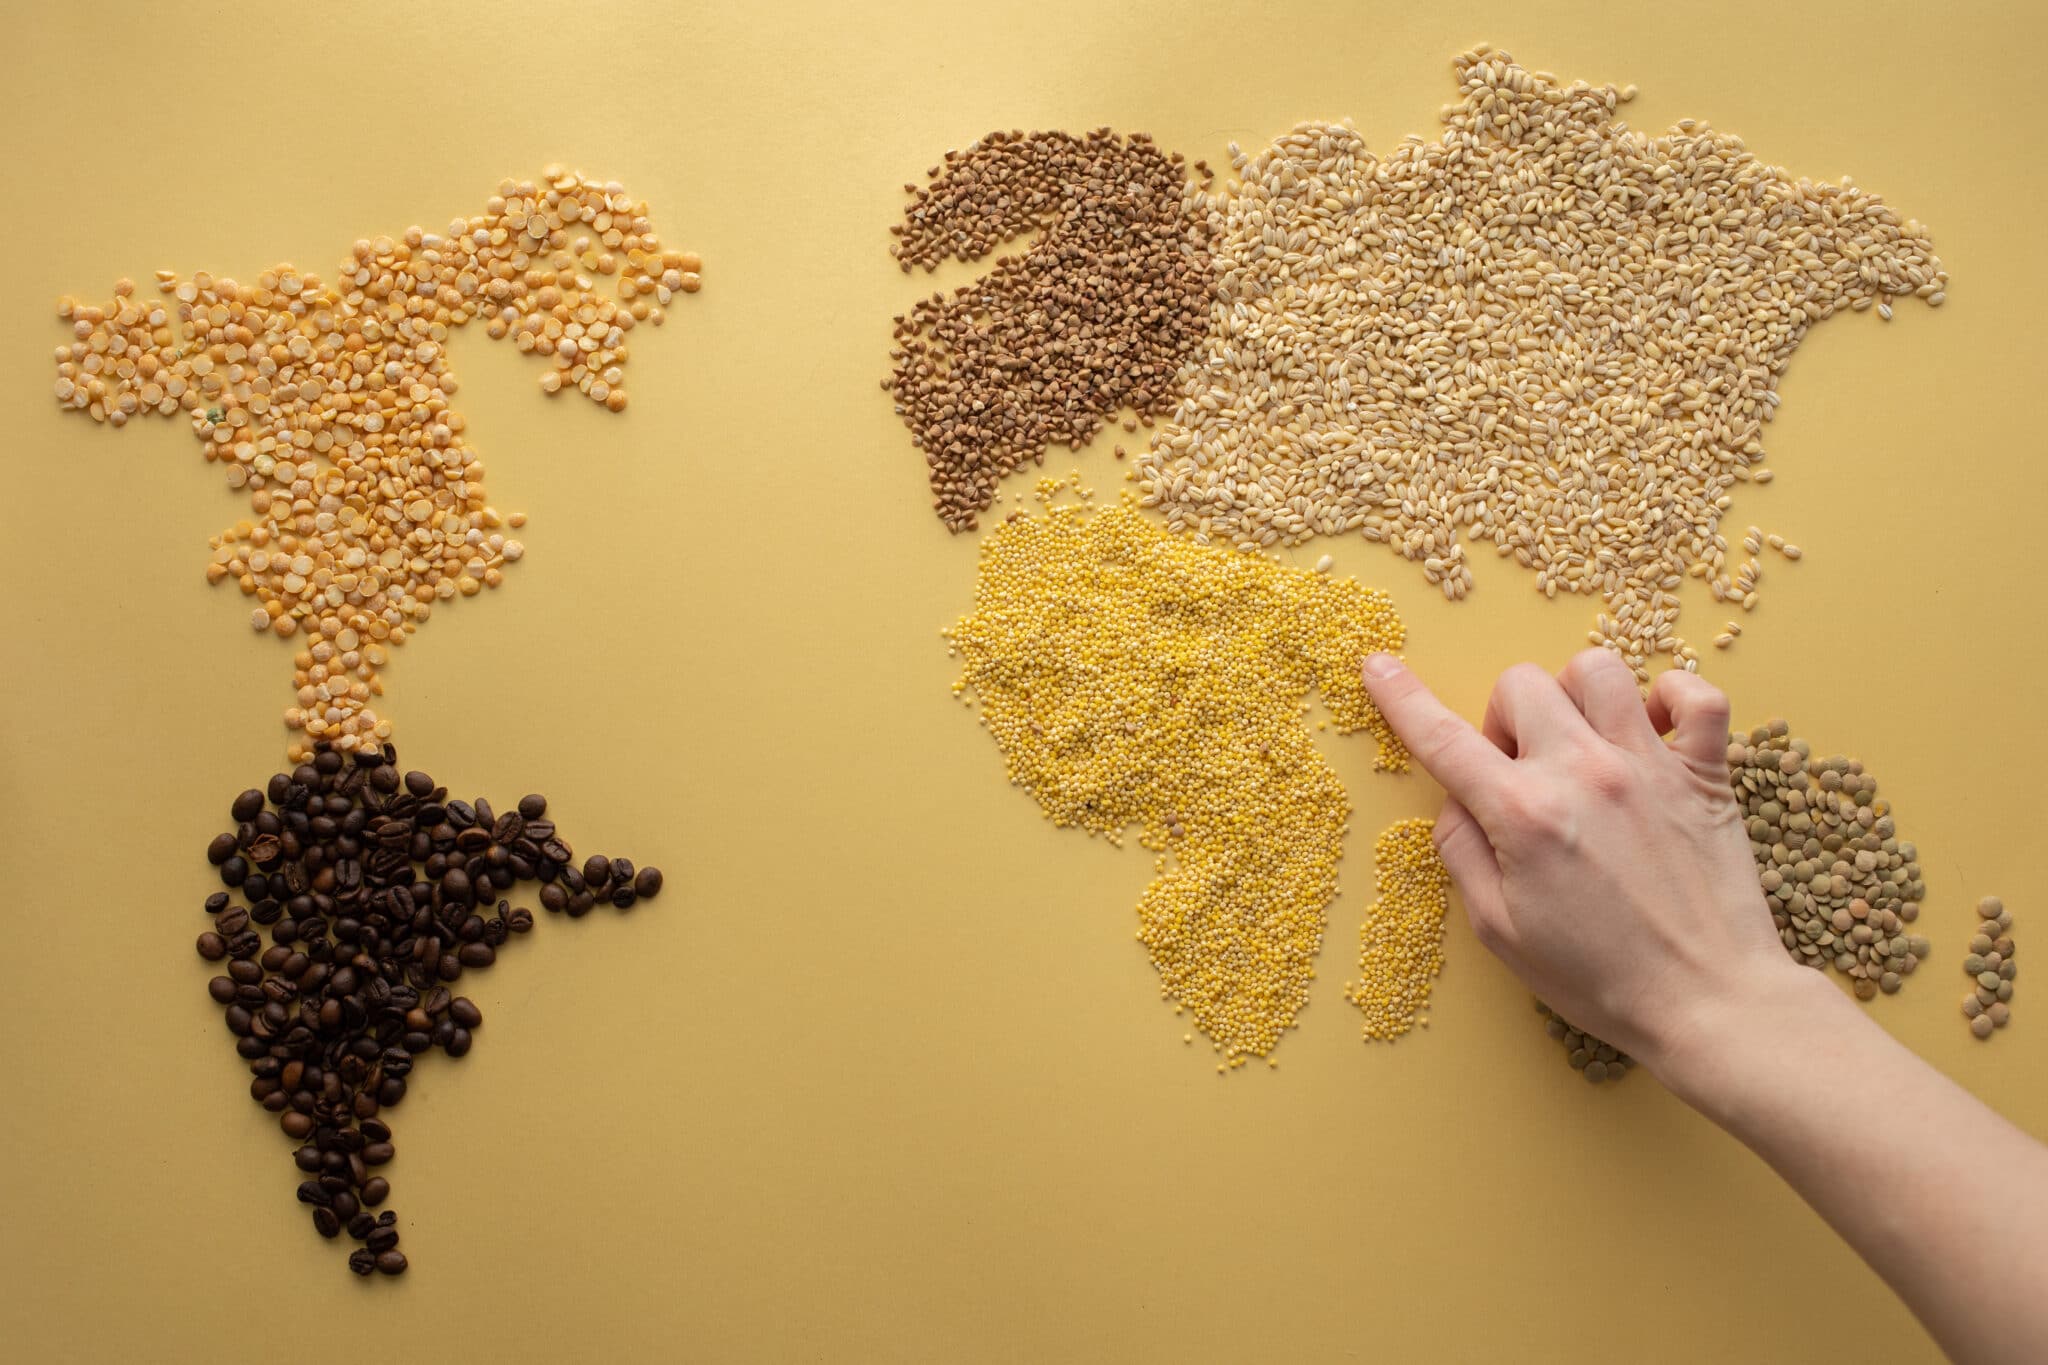 Anonymous person making world map with cereals and coffee beans